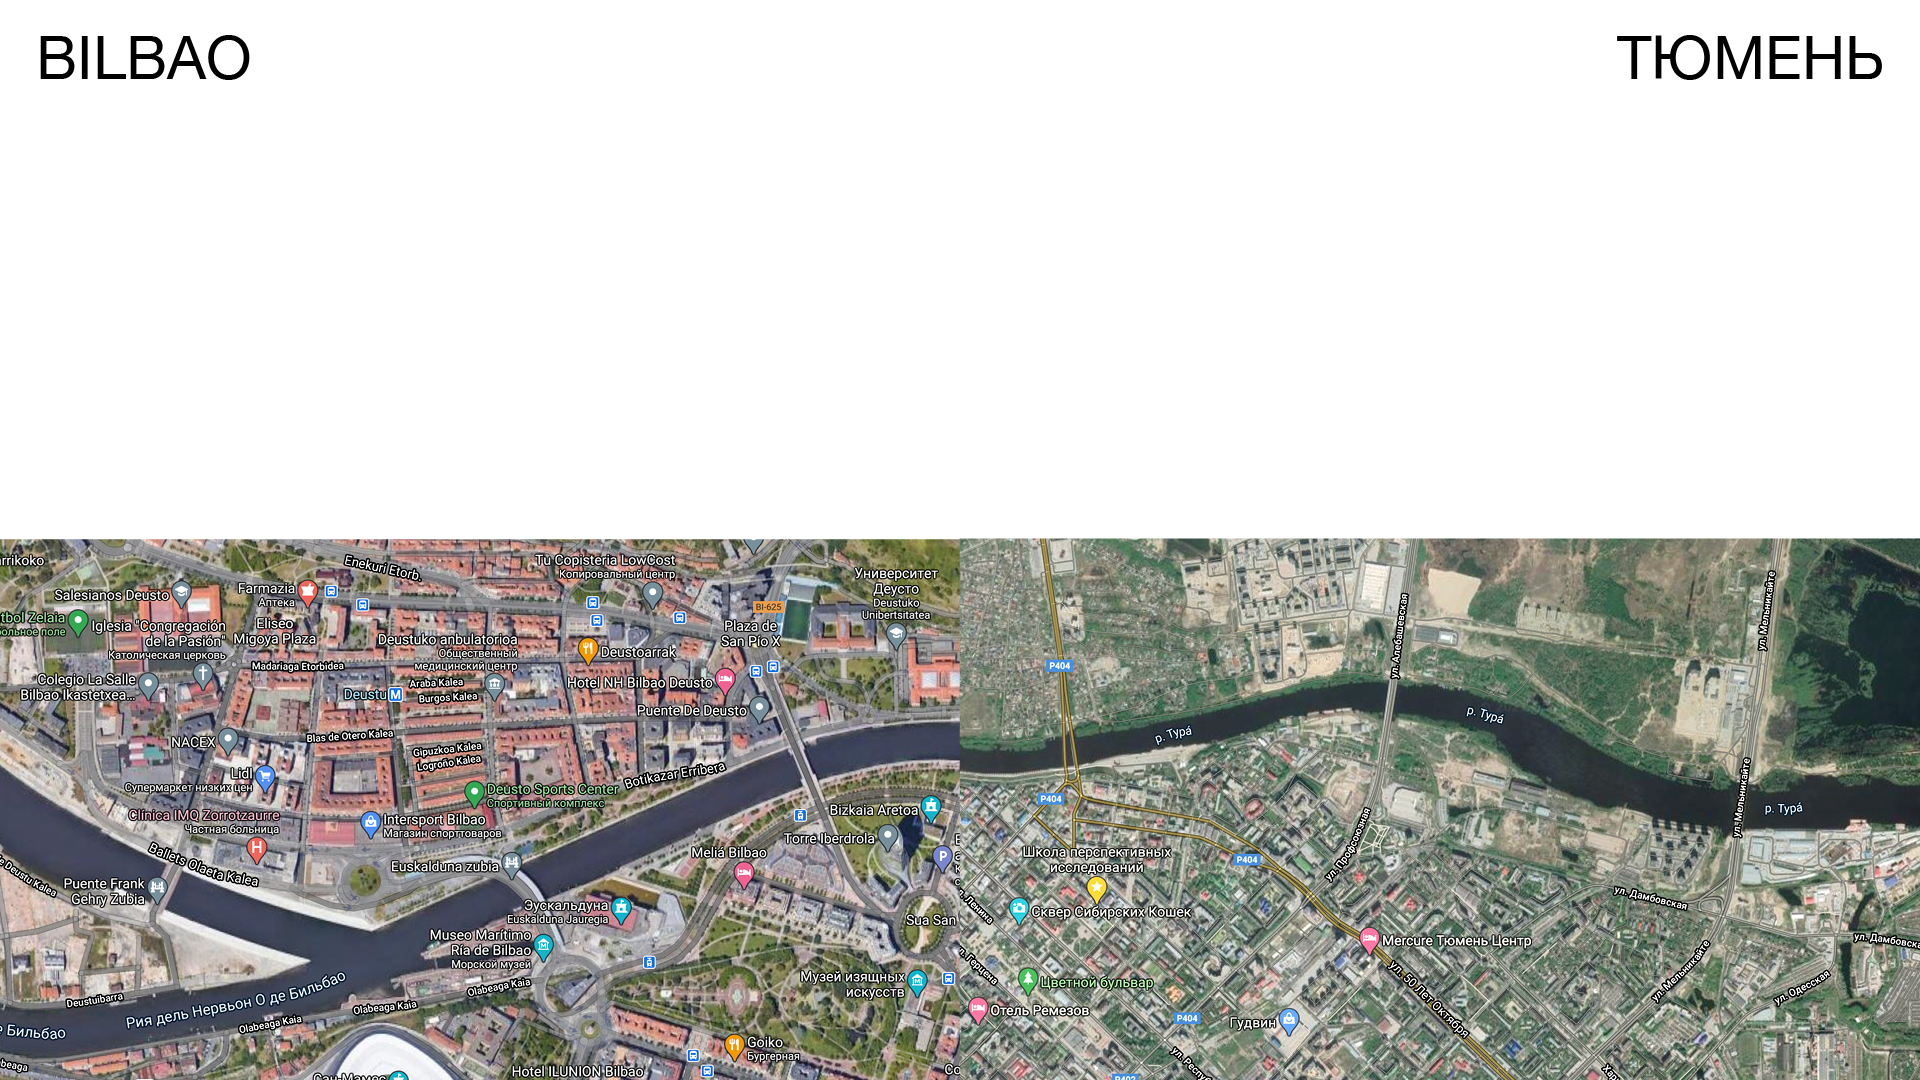 Walking and Mapping Bilbao